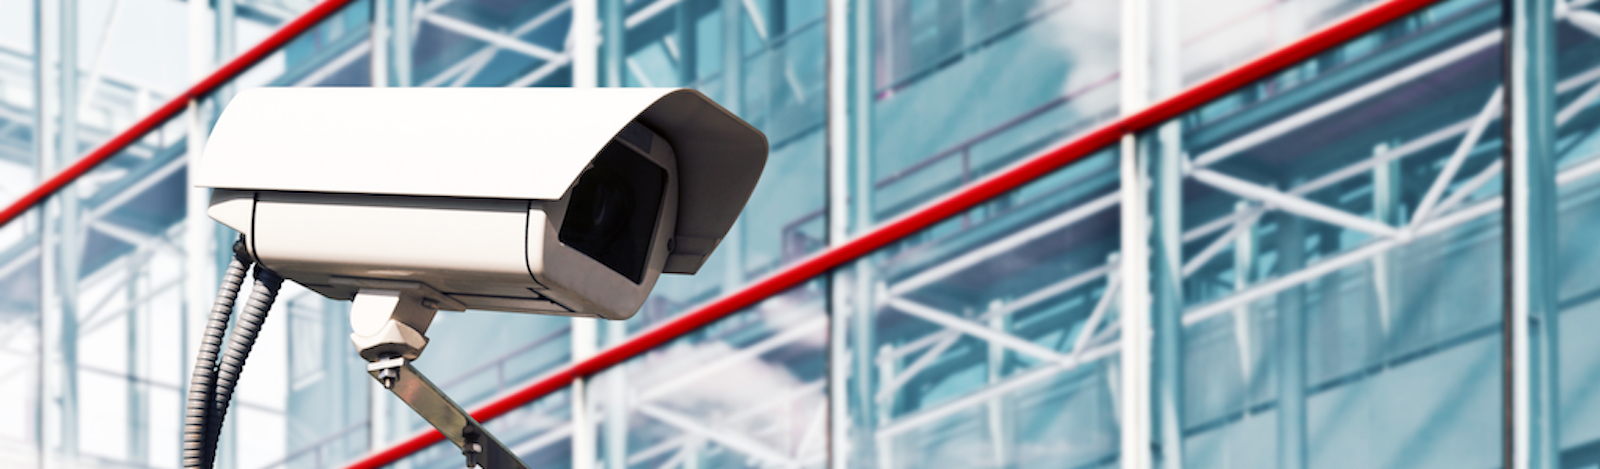 A Security Camera, a common tool associated with Security Services